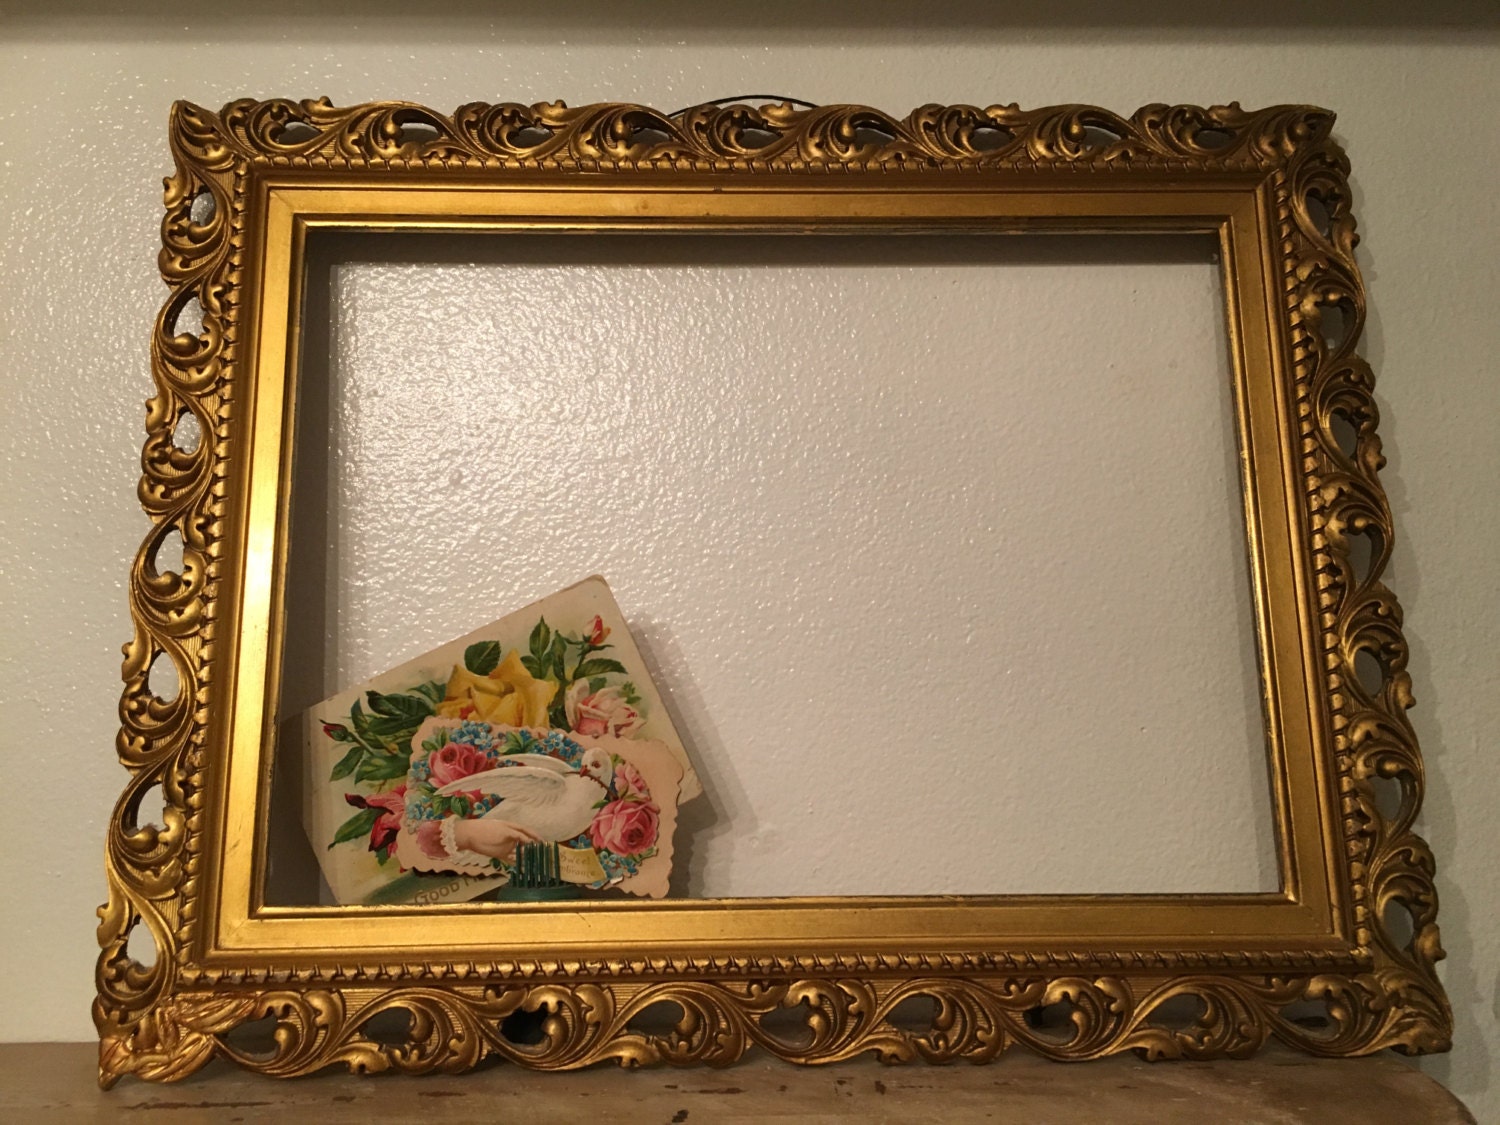 Antique Gesso over wood frame by CircaTime on Etsy